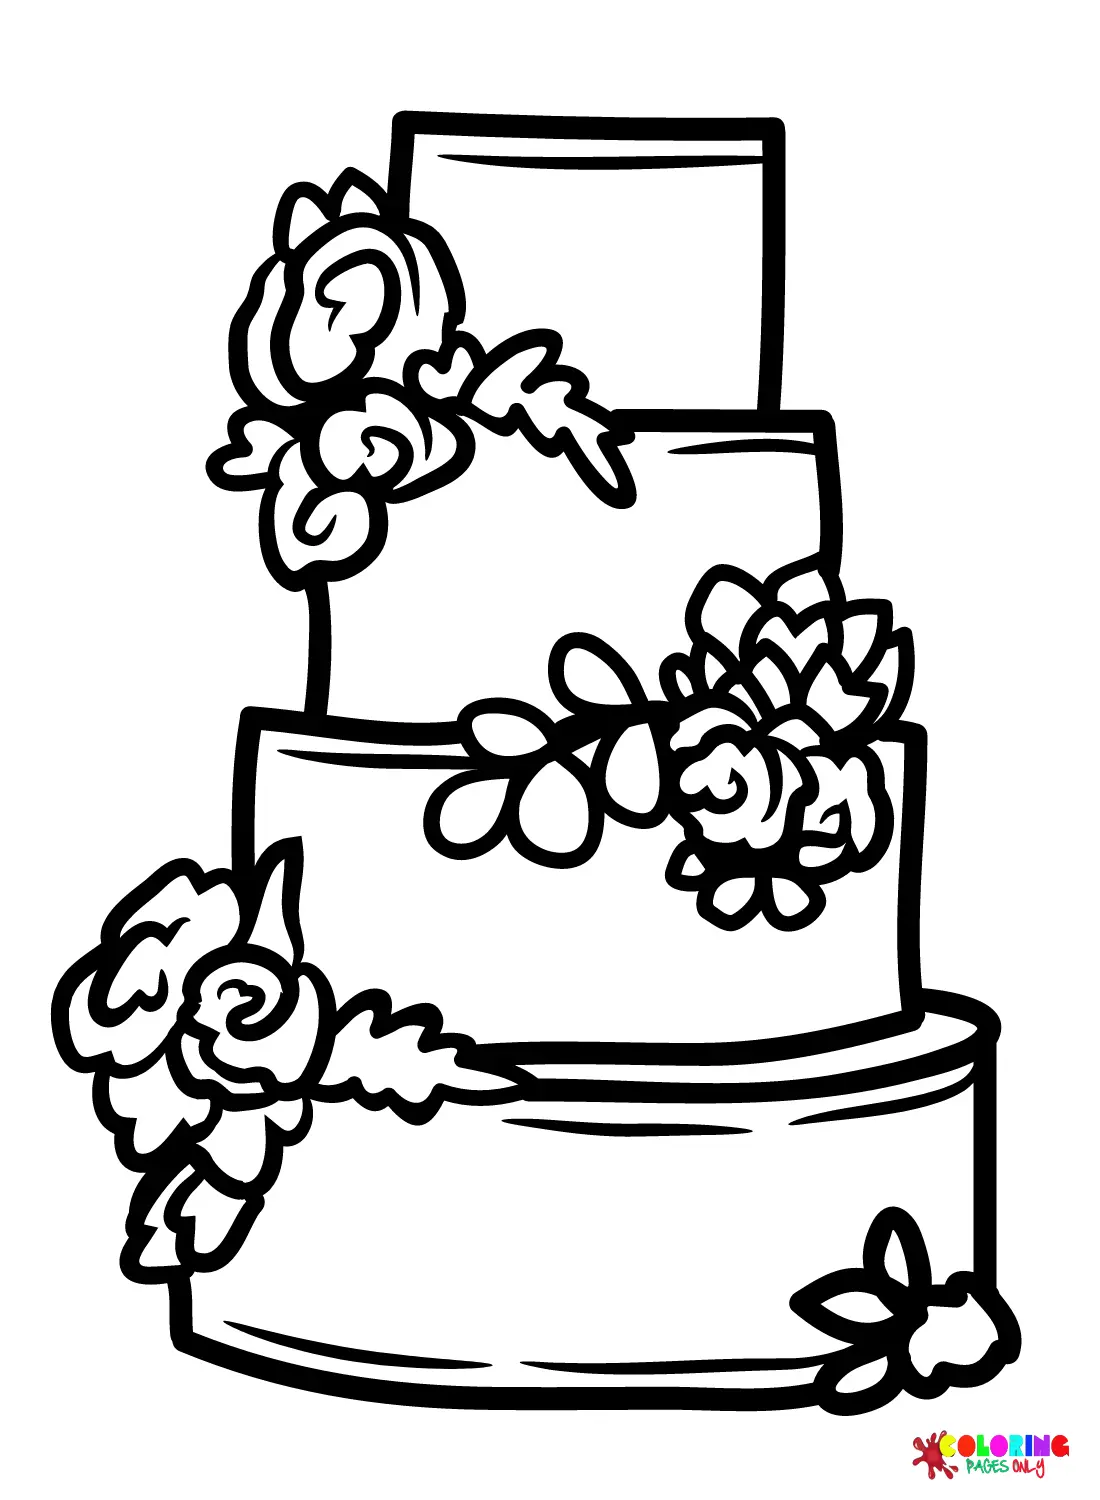 Wedding Cake Coloring Pages